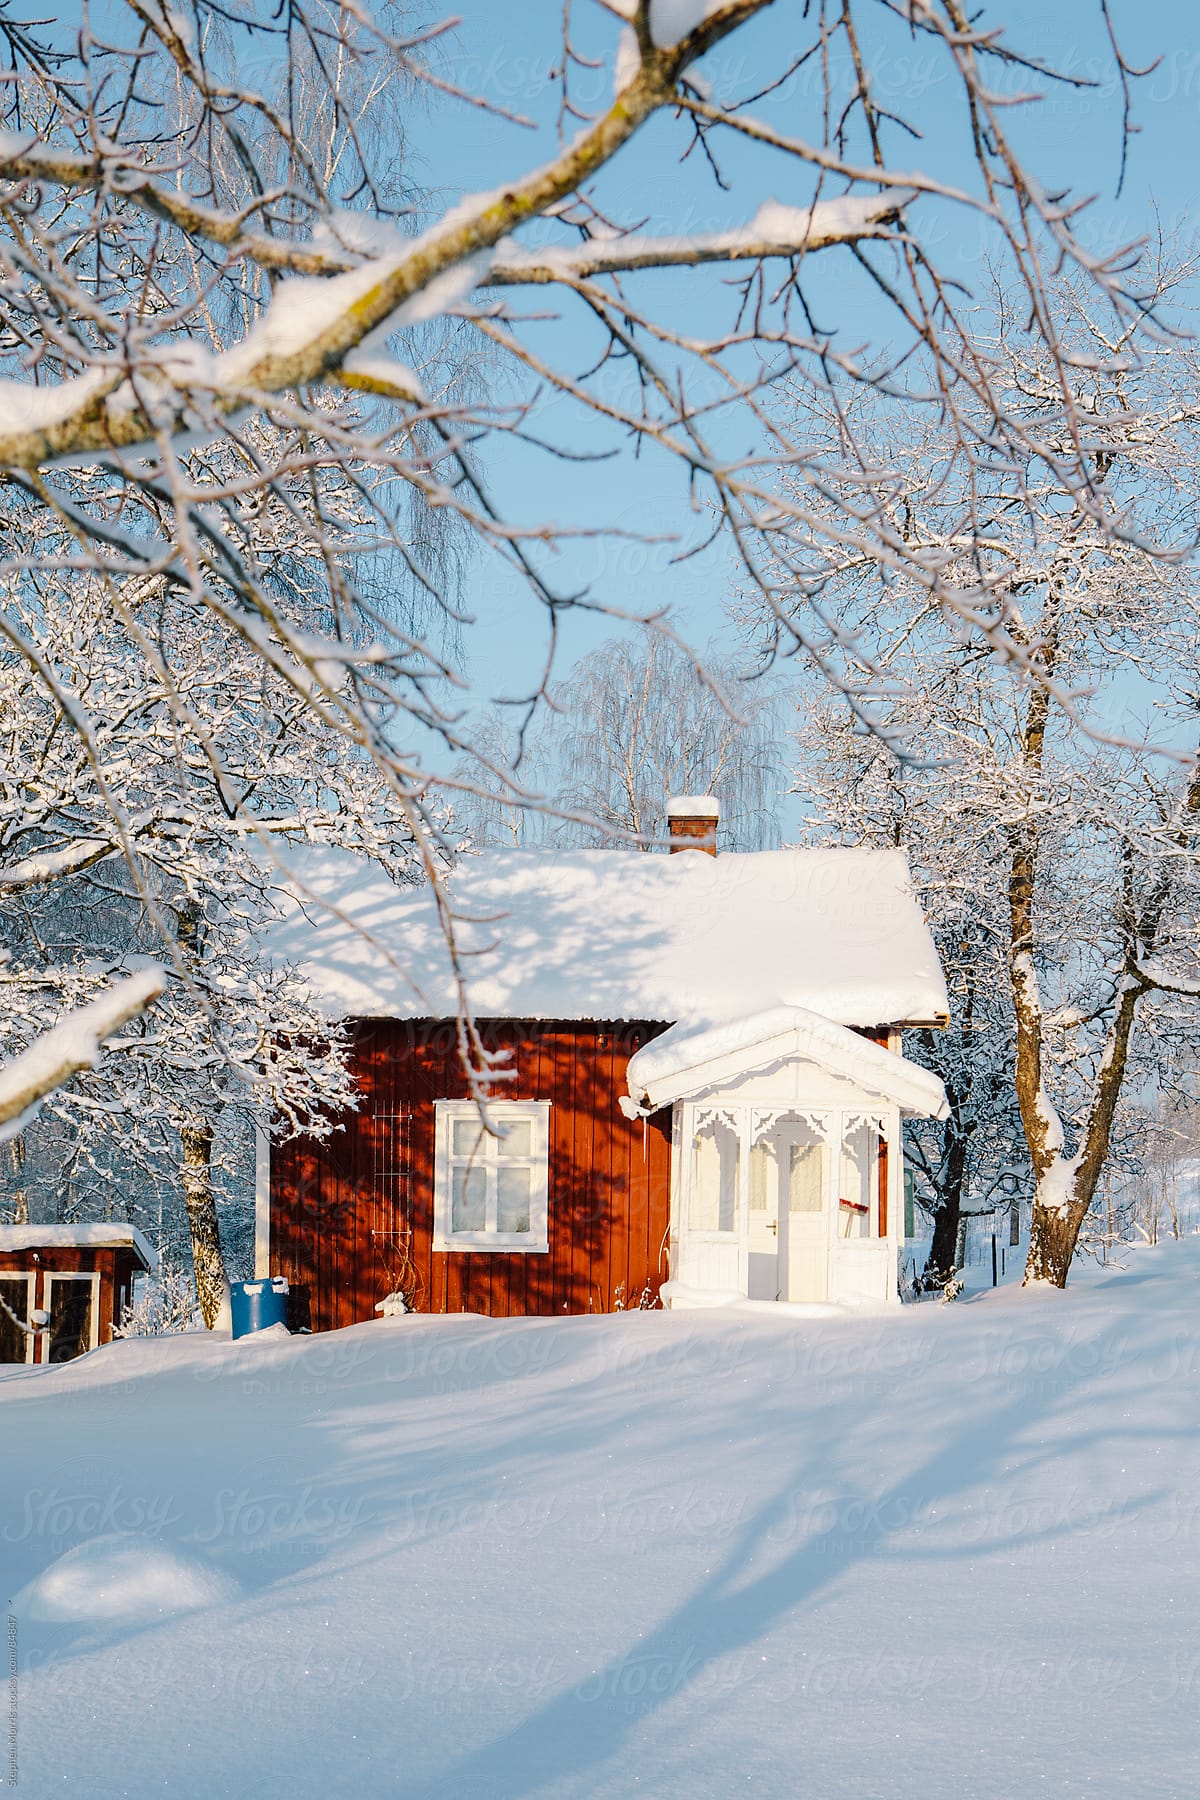 Red Swedish Cottage in Snowy Landscape